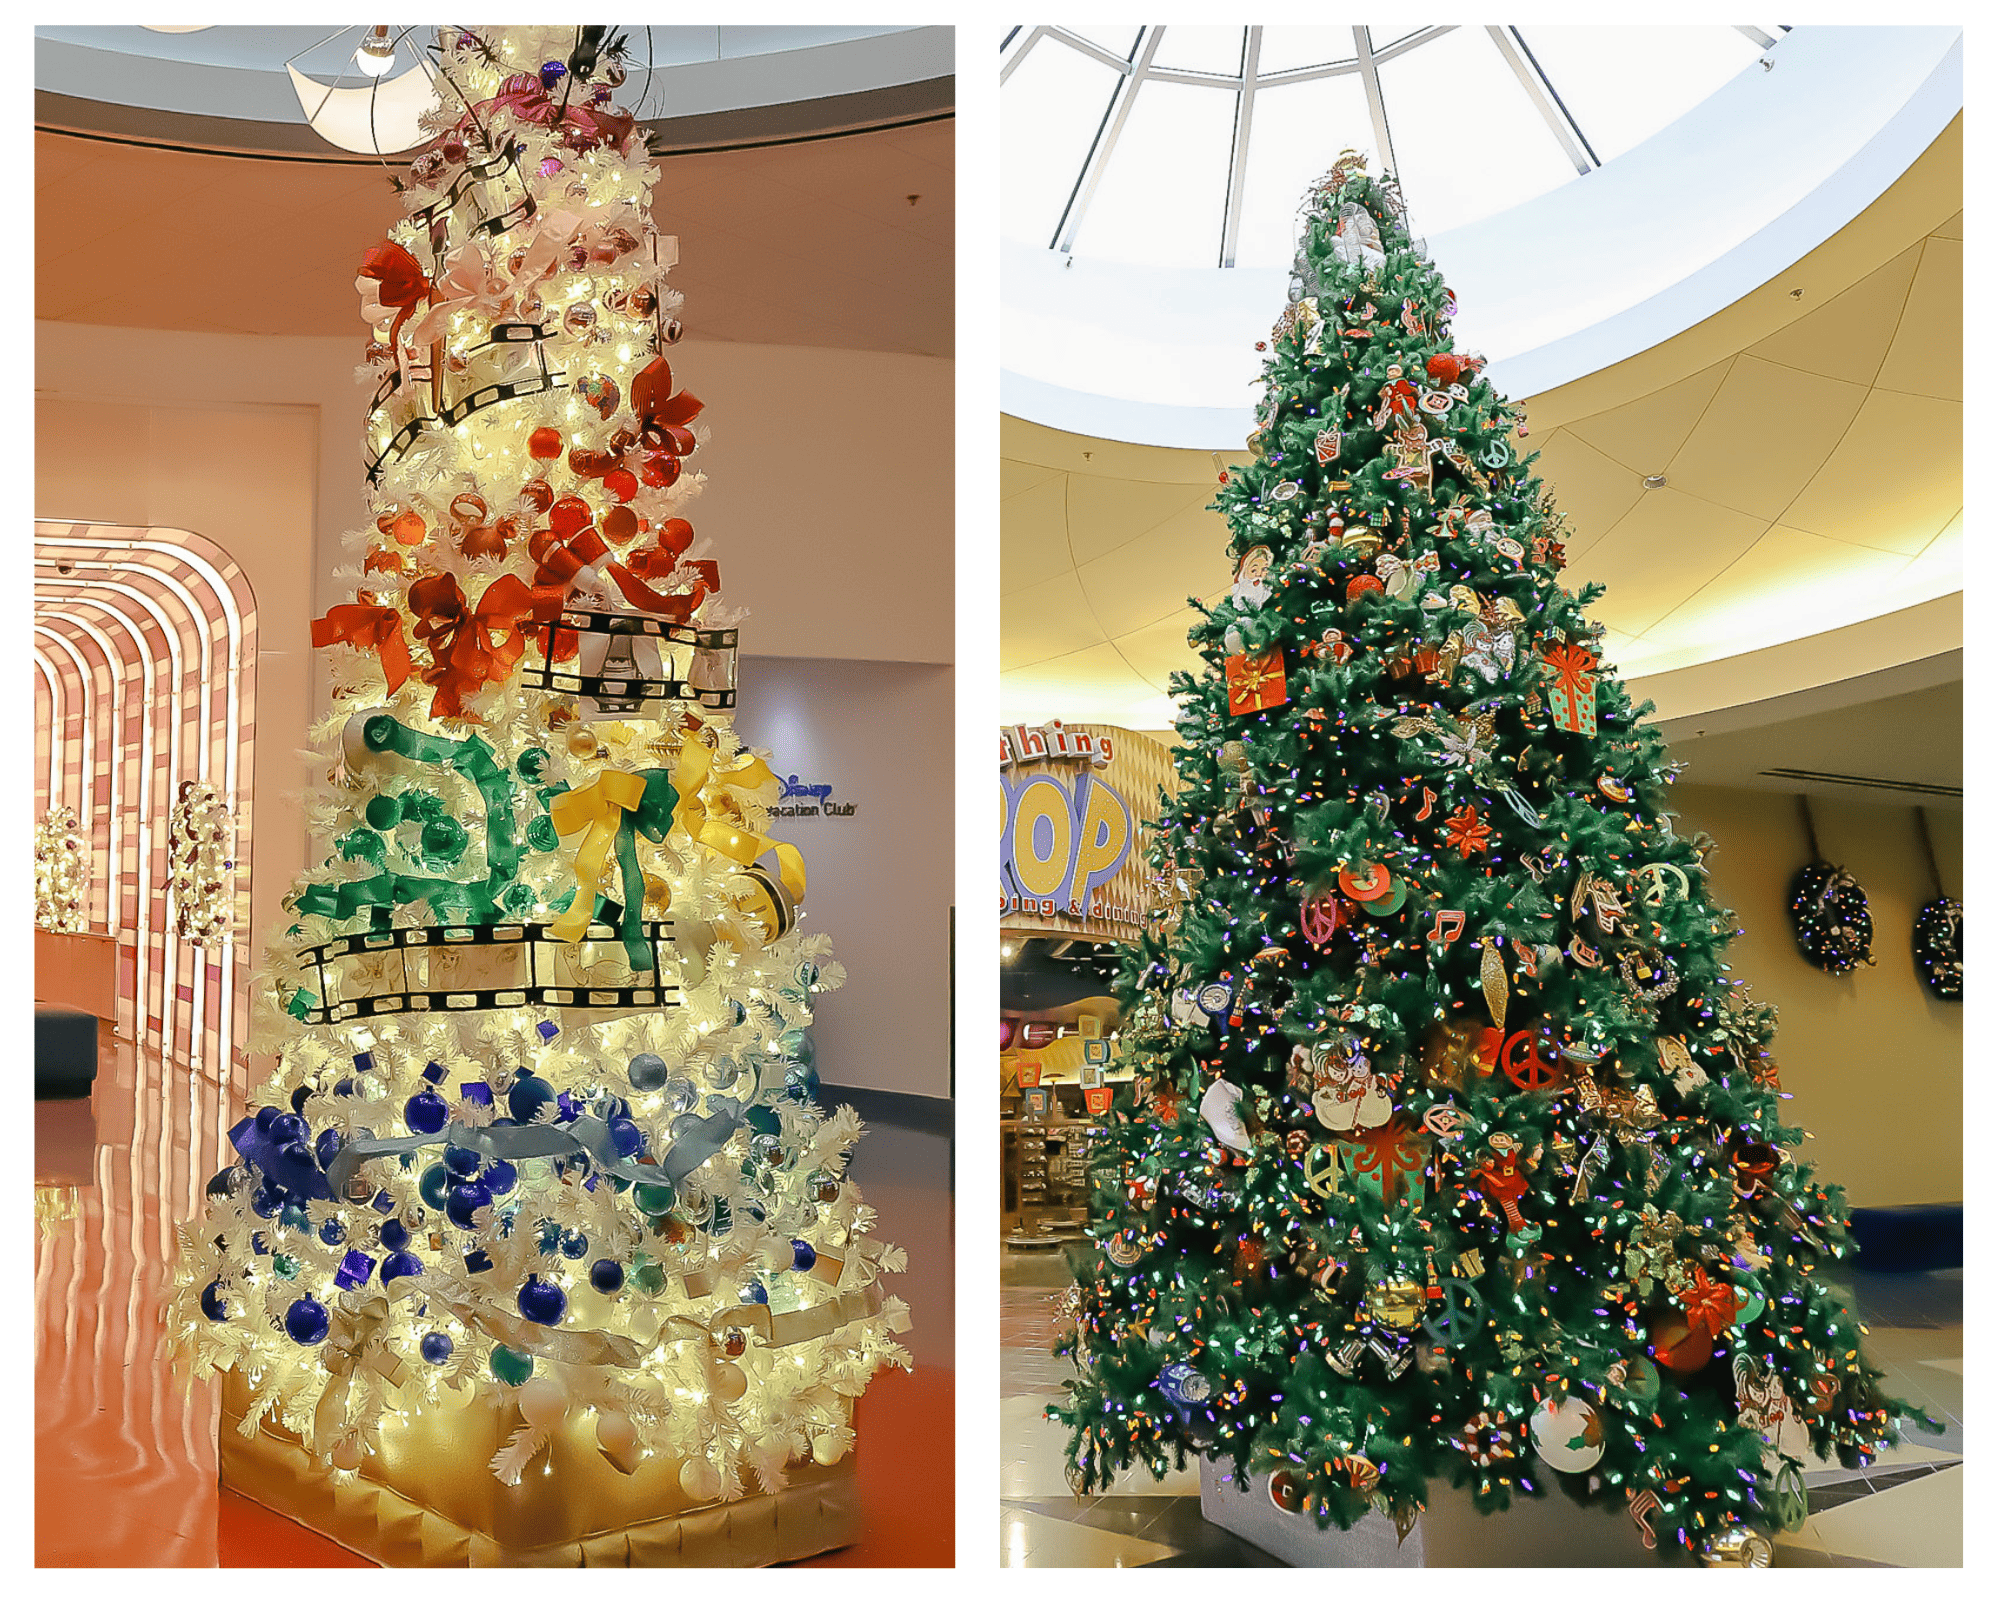 The Christmas tree at Art of Animation and Pop Century Resort.